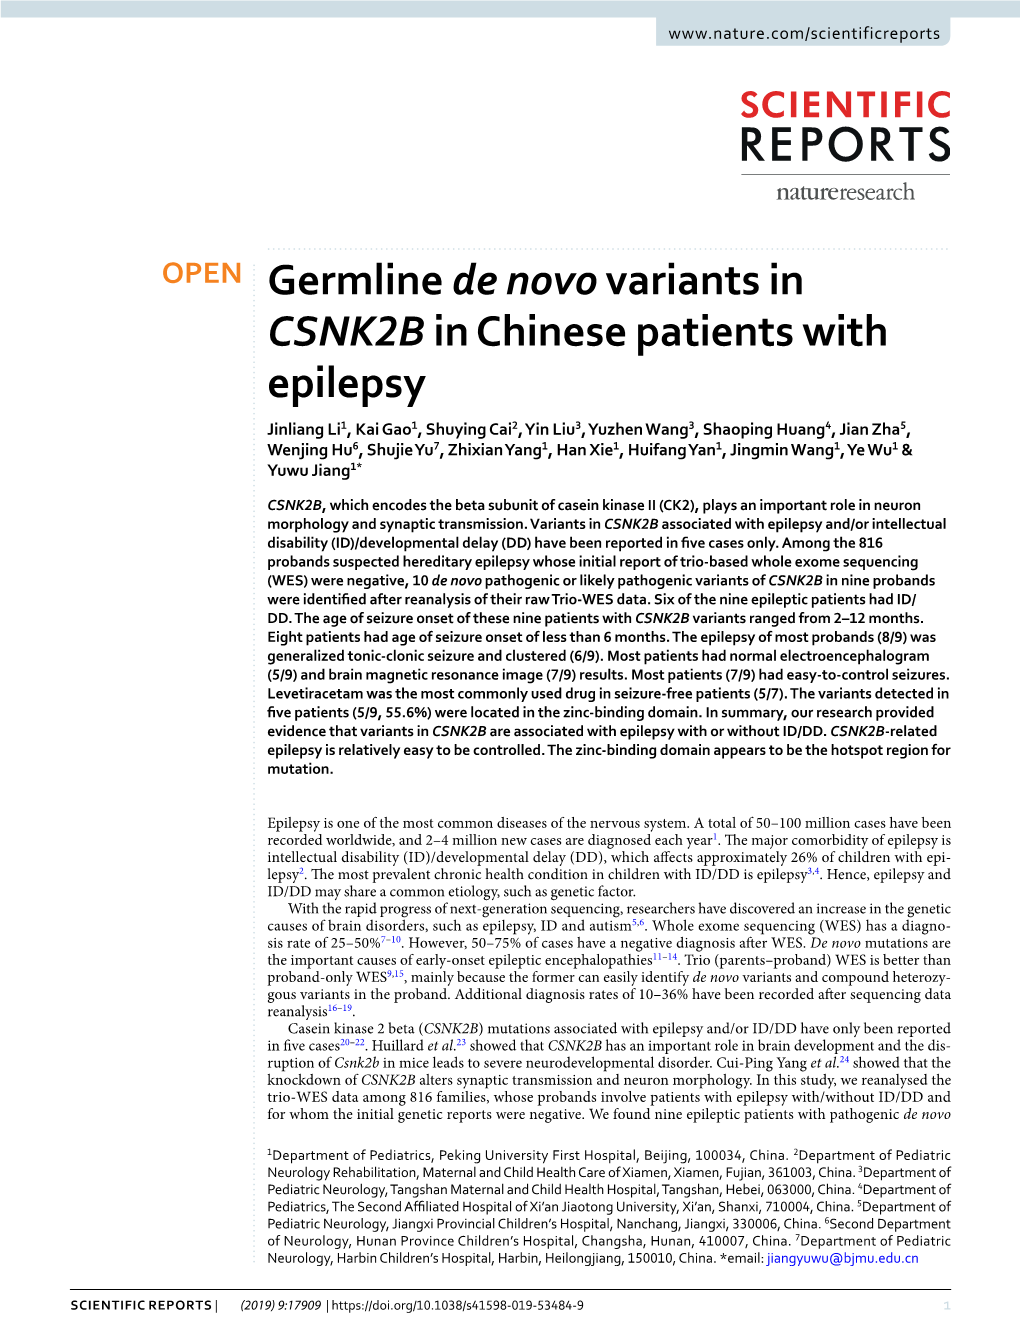 Germline De Novo Variants in CSNK2B in Chinese Patients with Epilepsy